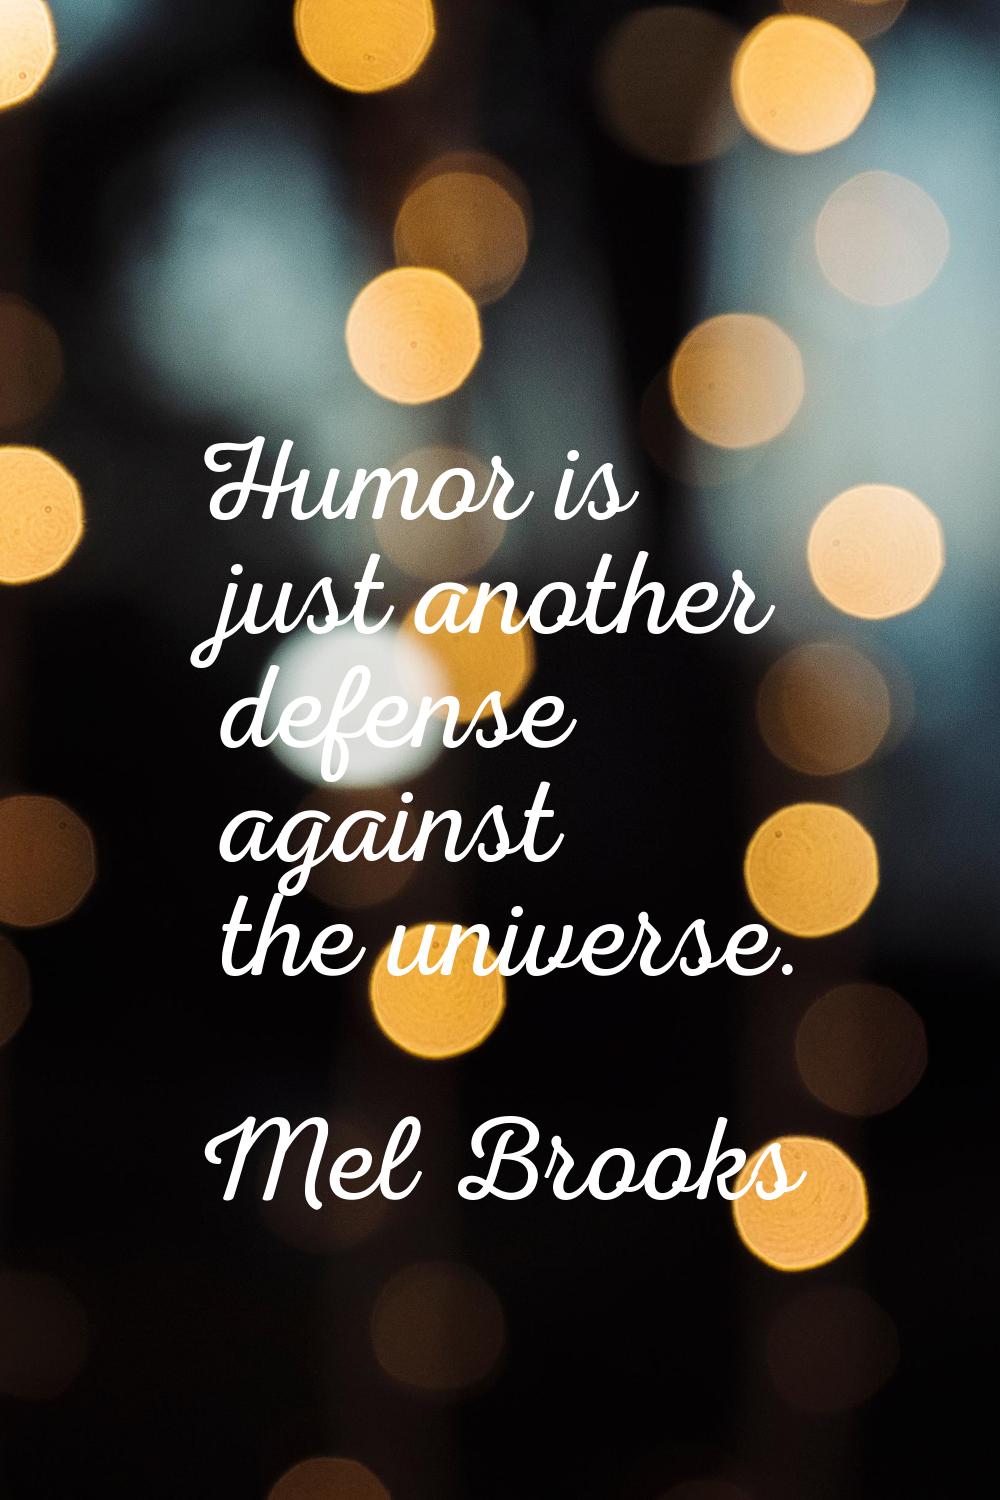 Humor is just another defense against the universe.